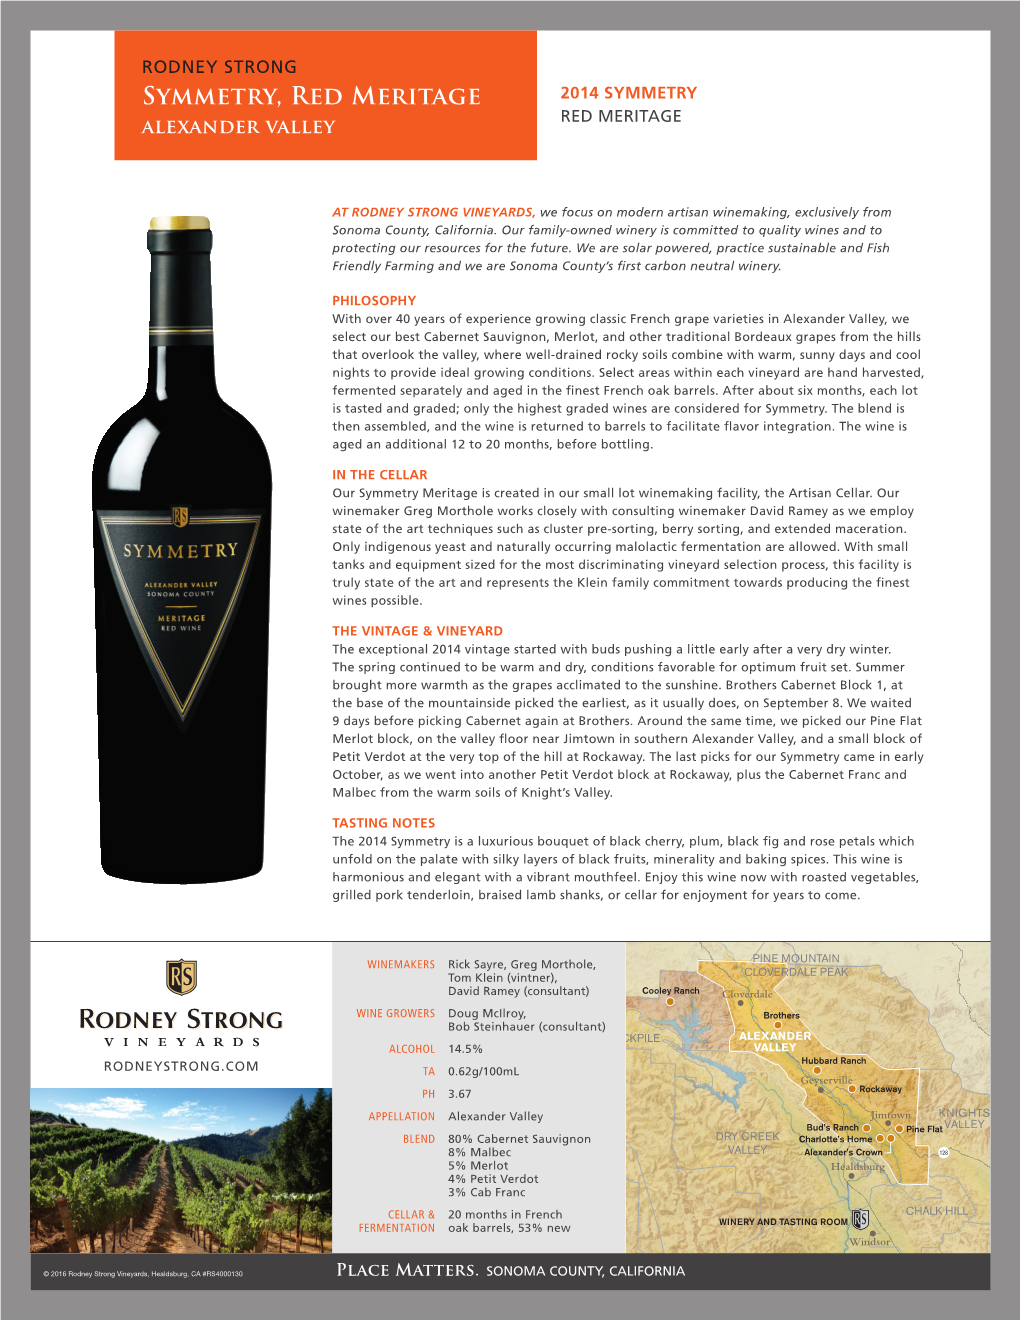 Symmetry, Red Meritage 2014 SYMMETRY RED MERITAGE Alexander Valley